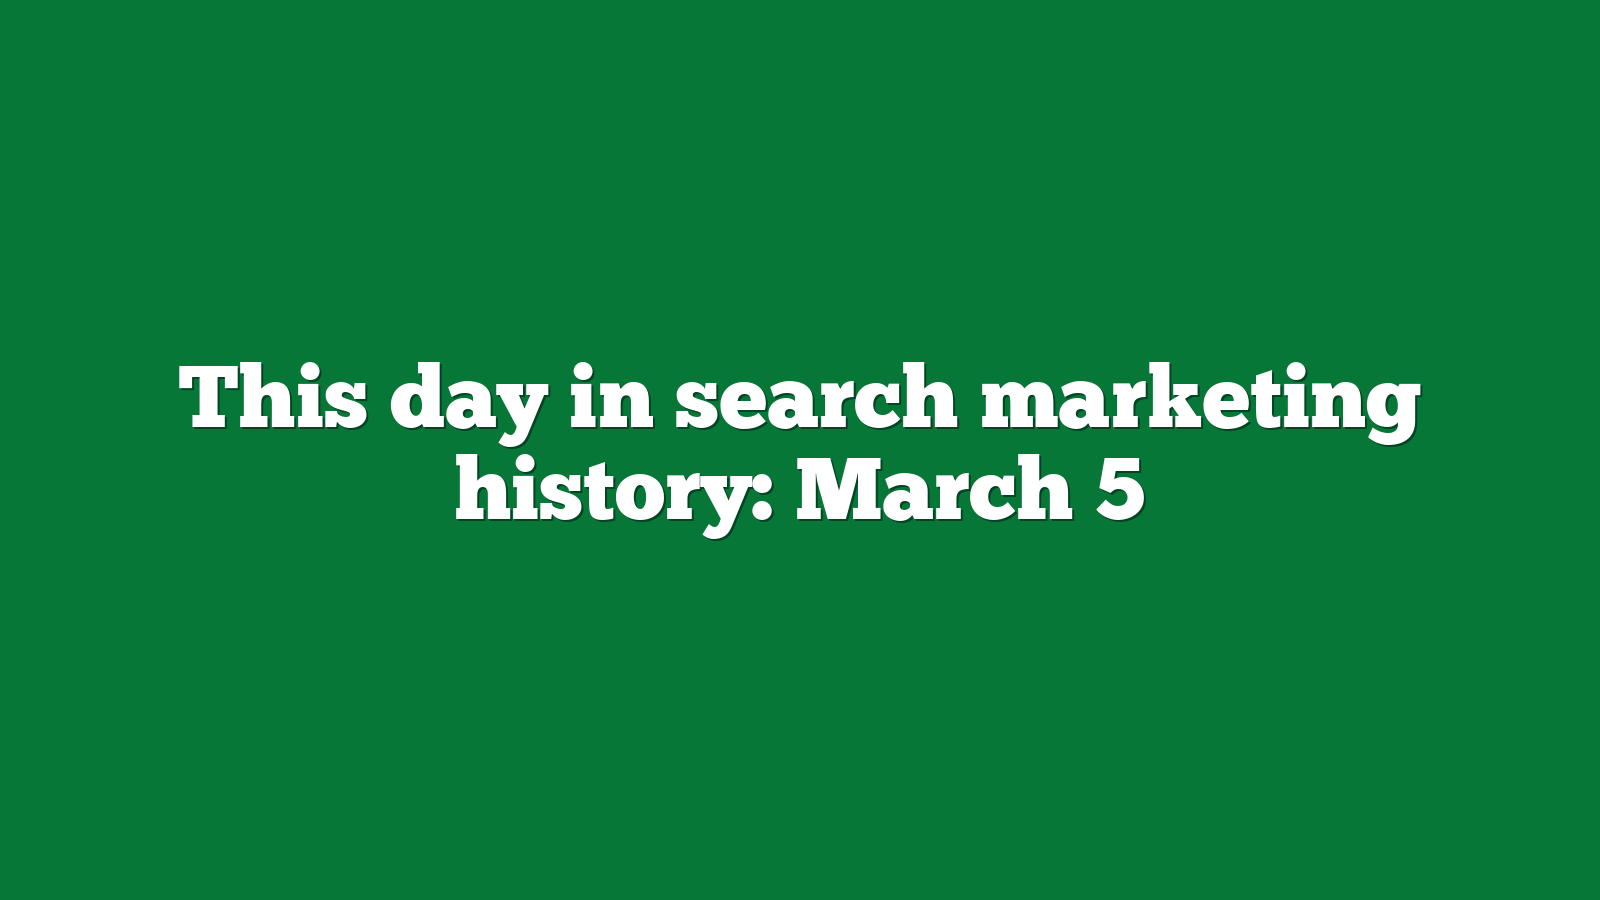 This day in search marketing history March 5